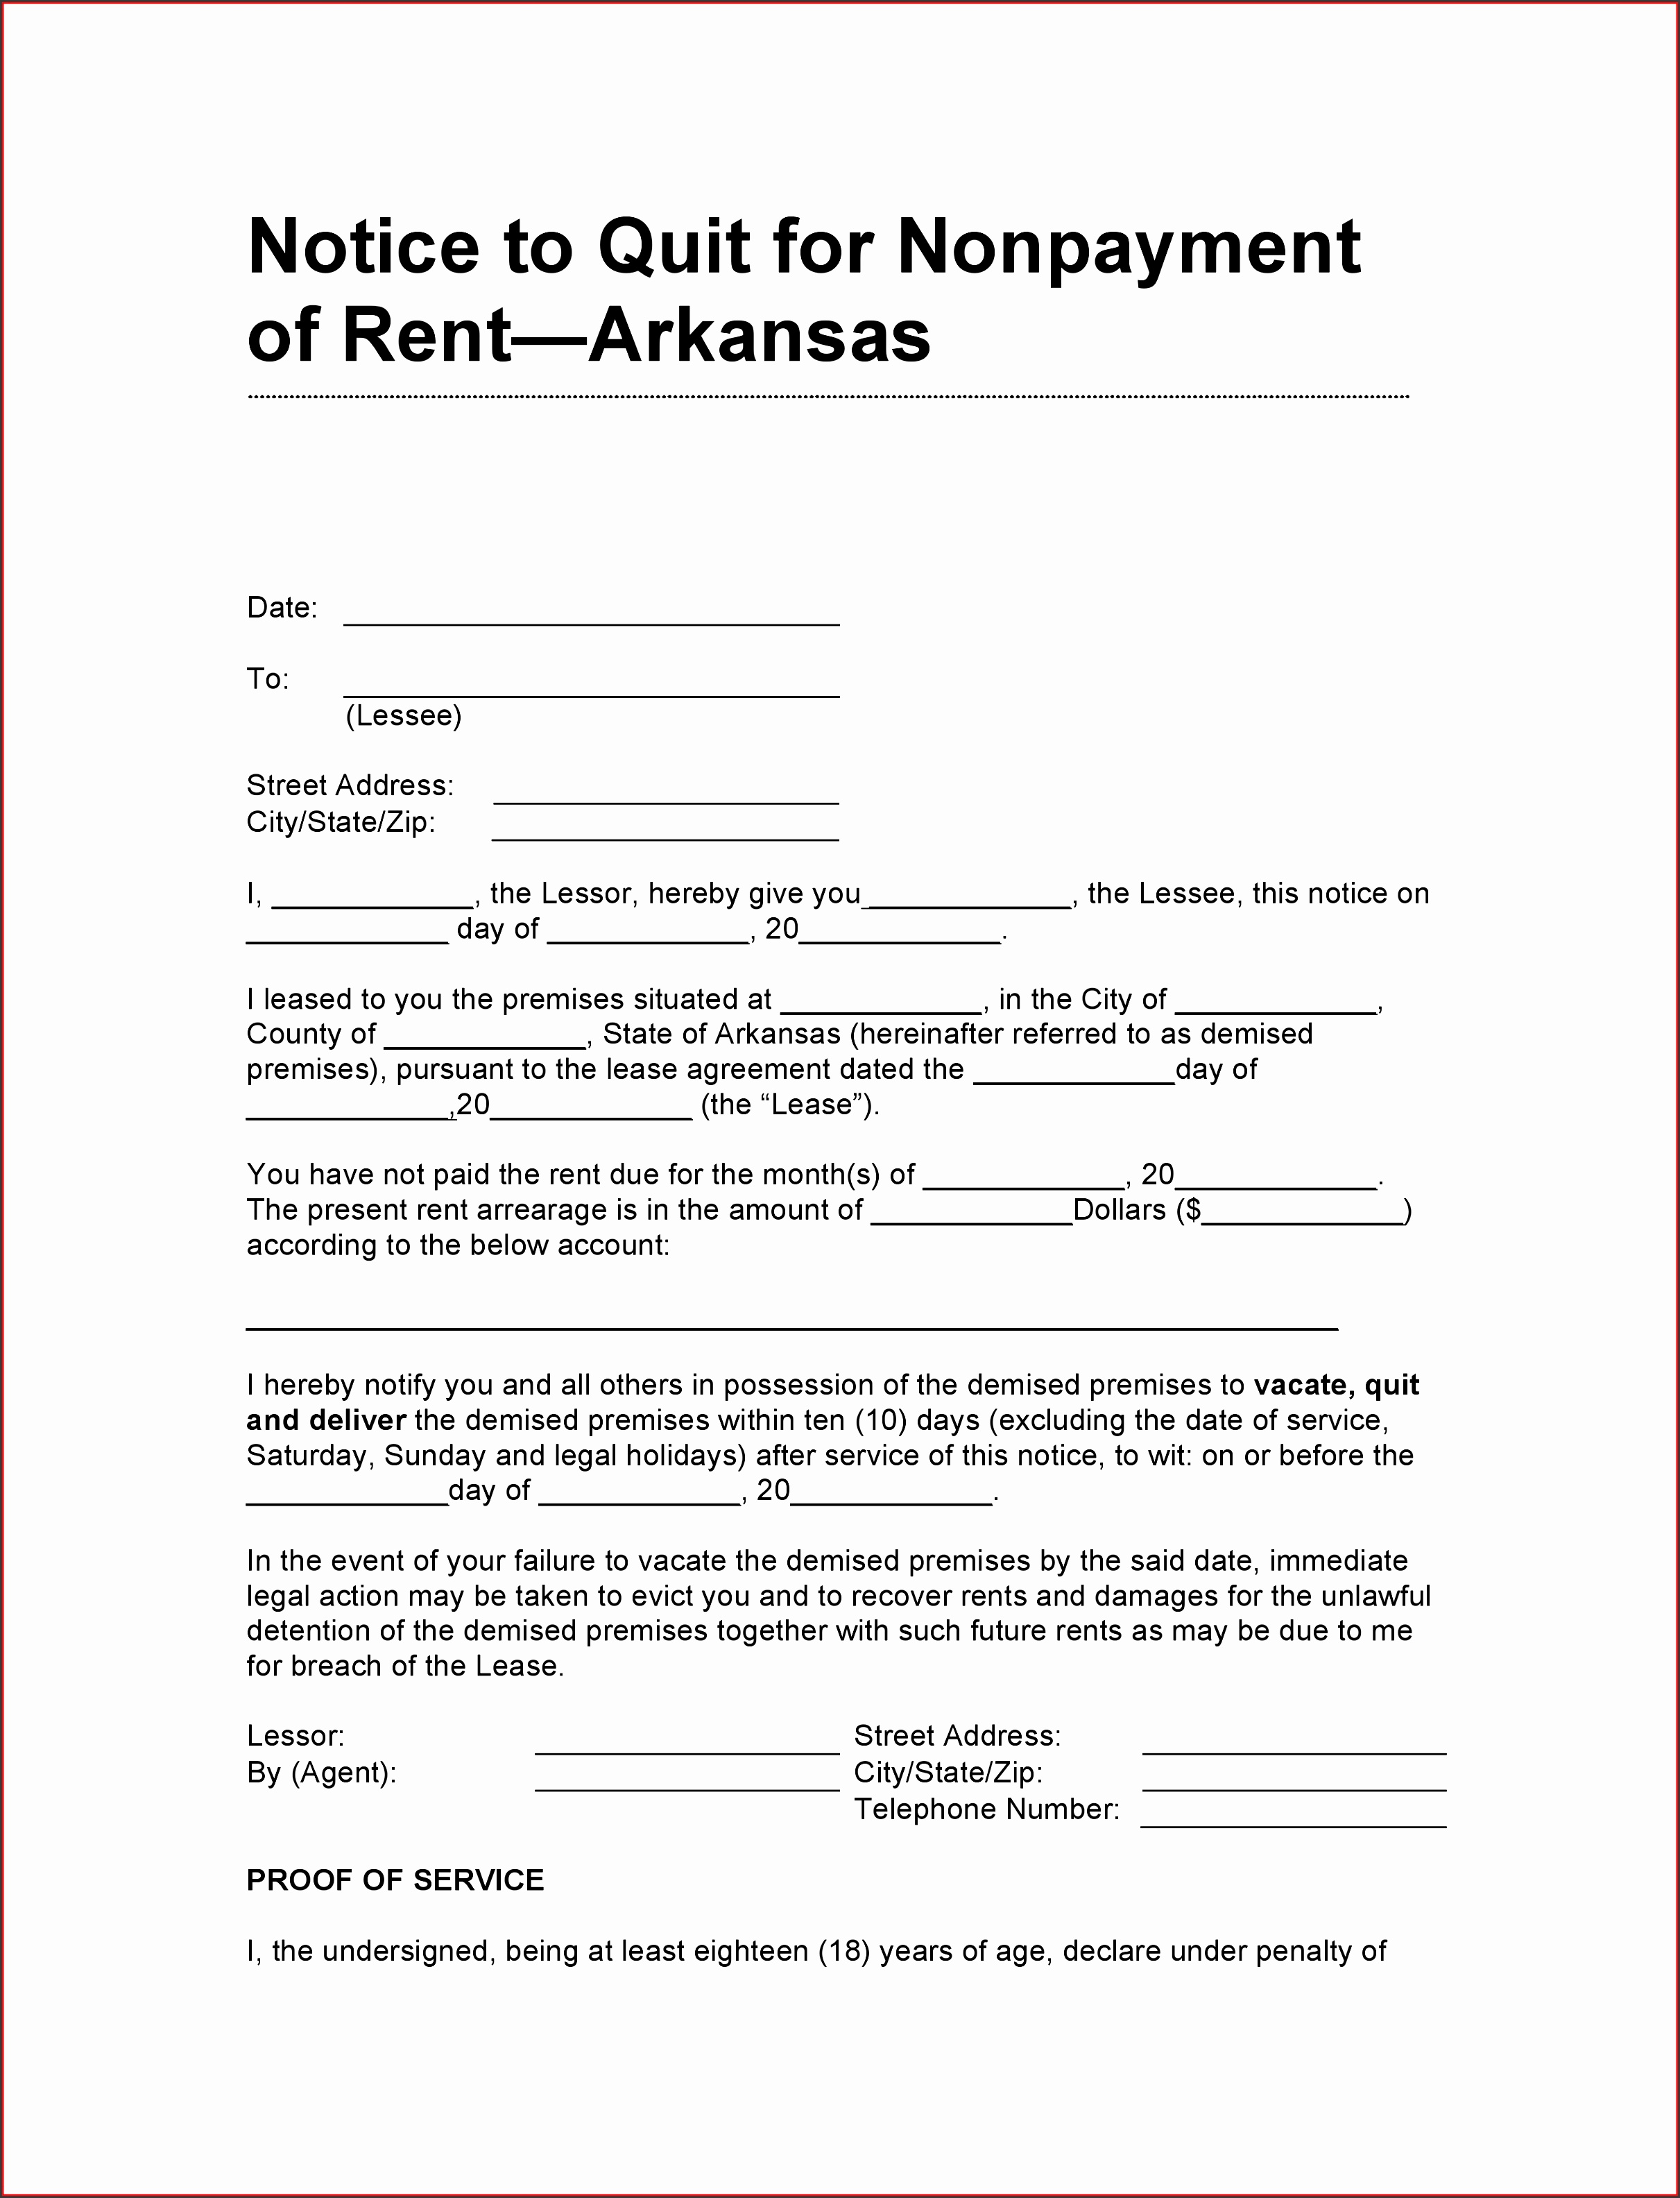 free printable eviction notice forms for sale poster template arkansas eviction notice form new free arkansas 10 day notice to quit for non payment of rent